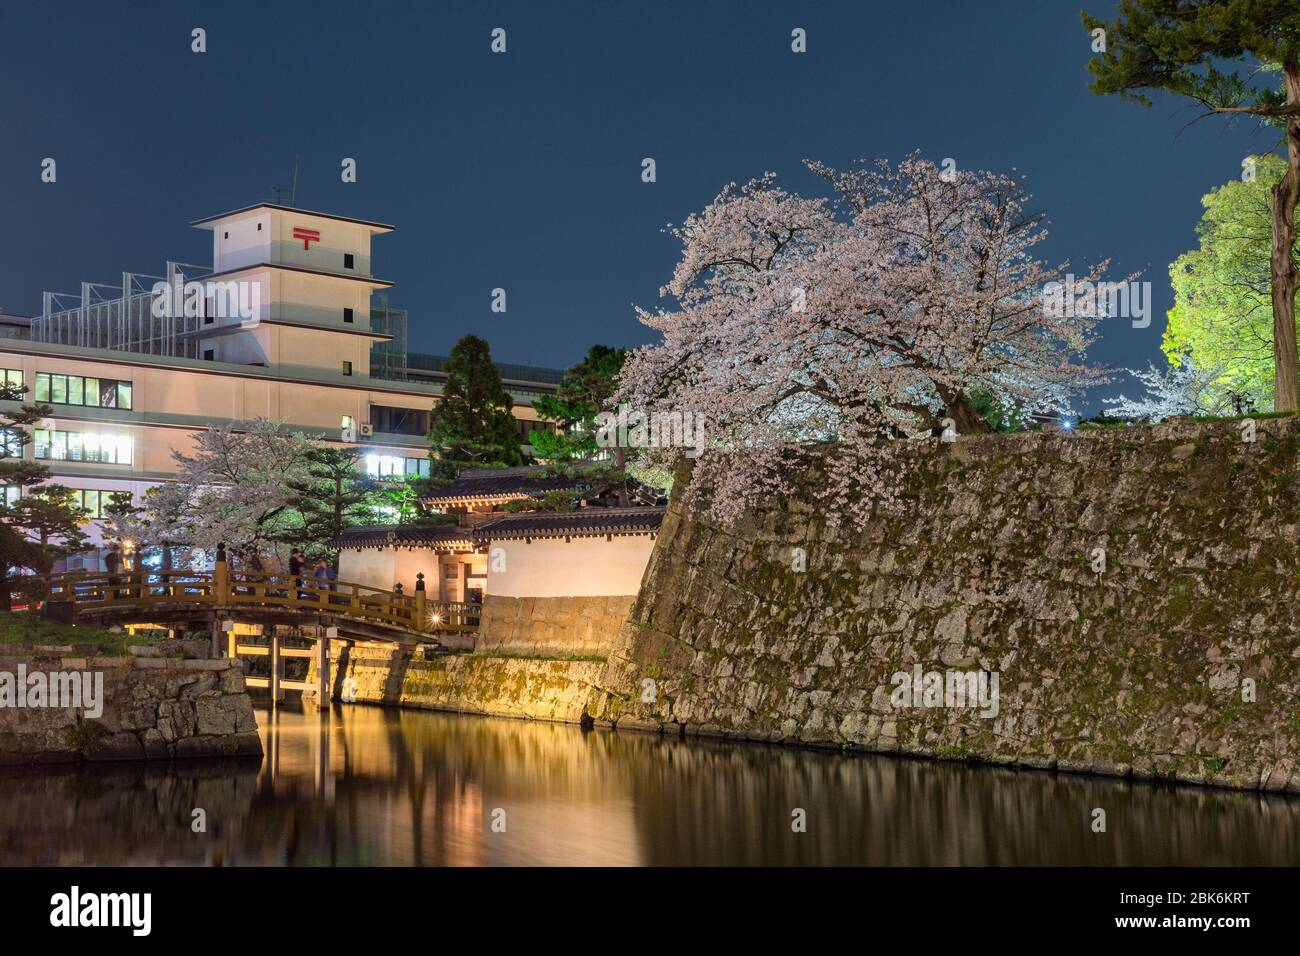 Entrance to the Wakayama castle with cherry blossoms, old historic Japanese castle in Wakayama city, Japan Stock Photo